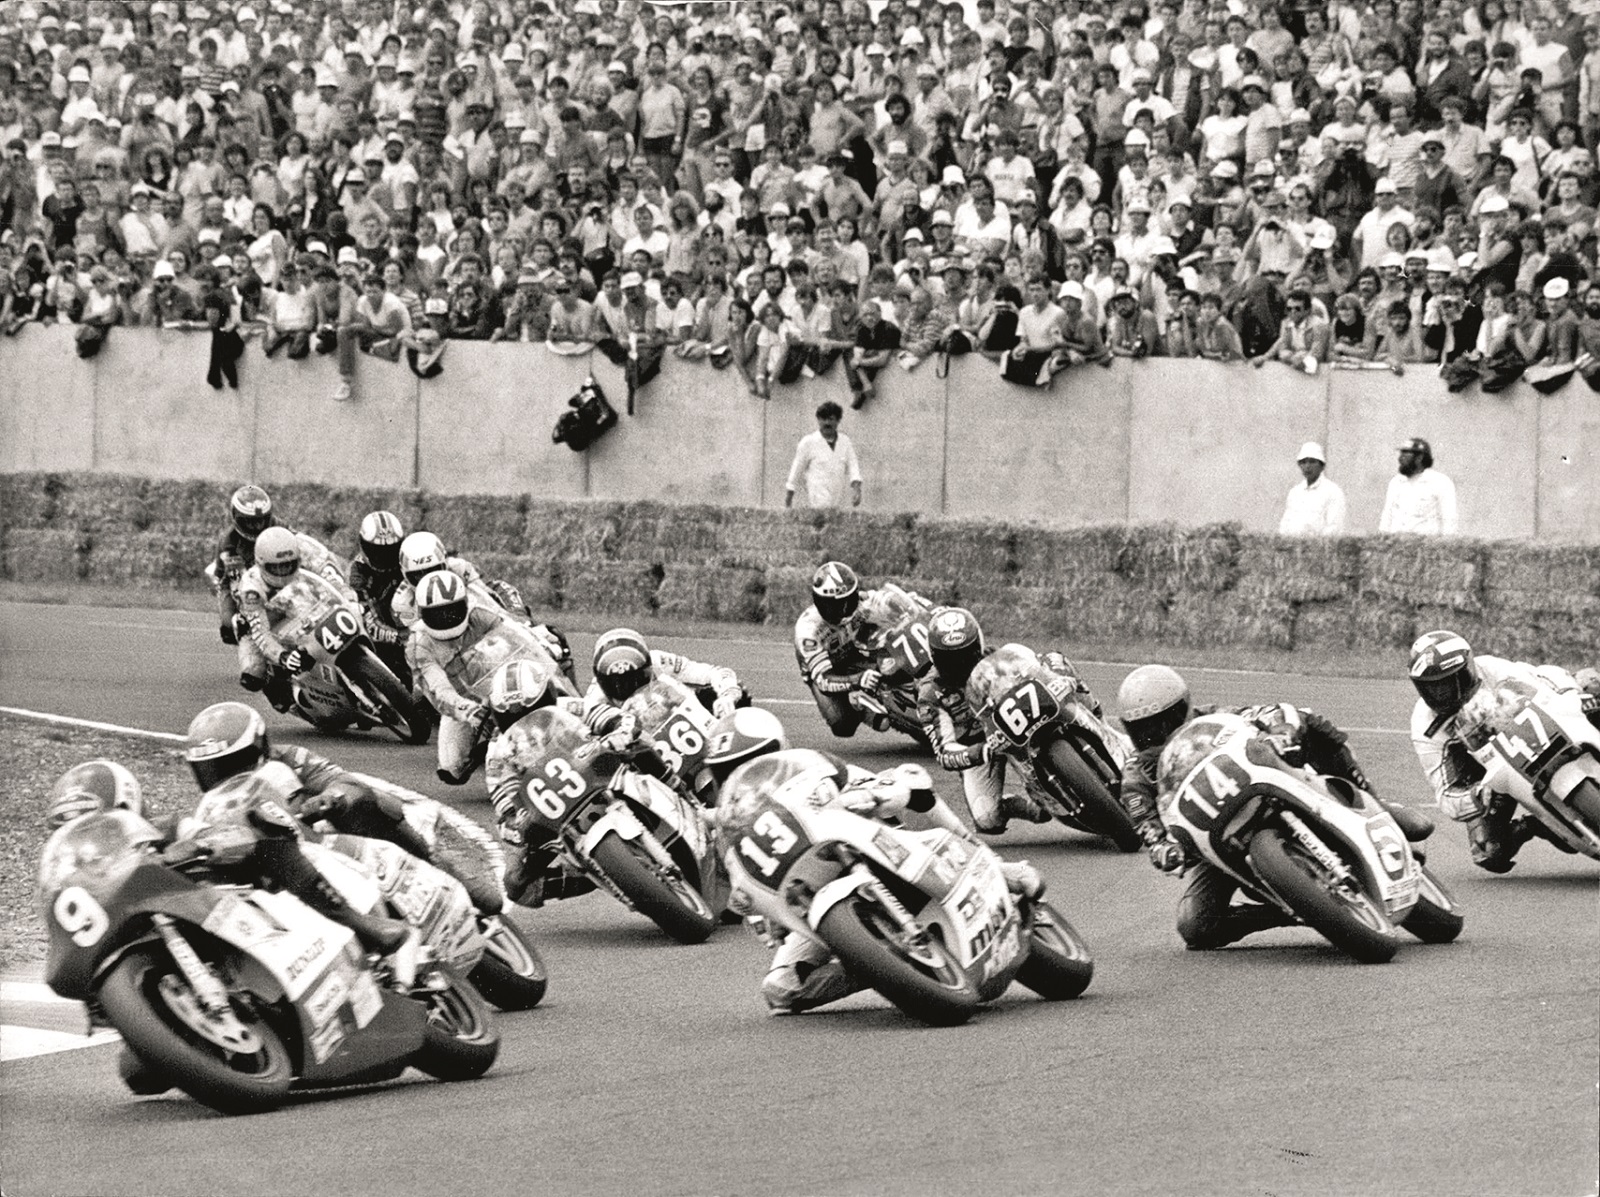 Jul. 22, 1985 - American Winner Of Motor Bike Race Freddie Spencer an American, won the Annual Motor Bicycle Race held at Le Mans, France, Race. He was riding a Honda. OPS: Competitors in full speed during the Care., Image: 210033996, License: Rights-managed, Restrictions: , Model Release: no, Credit line: Keystone Pictures USA / Zuma Press / Profimedia